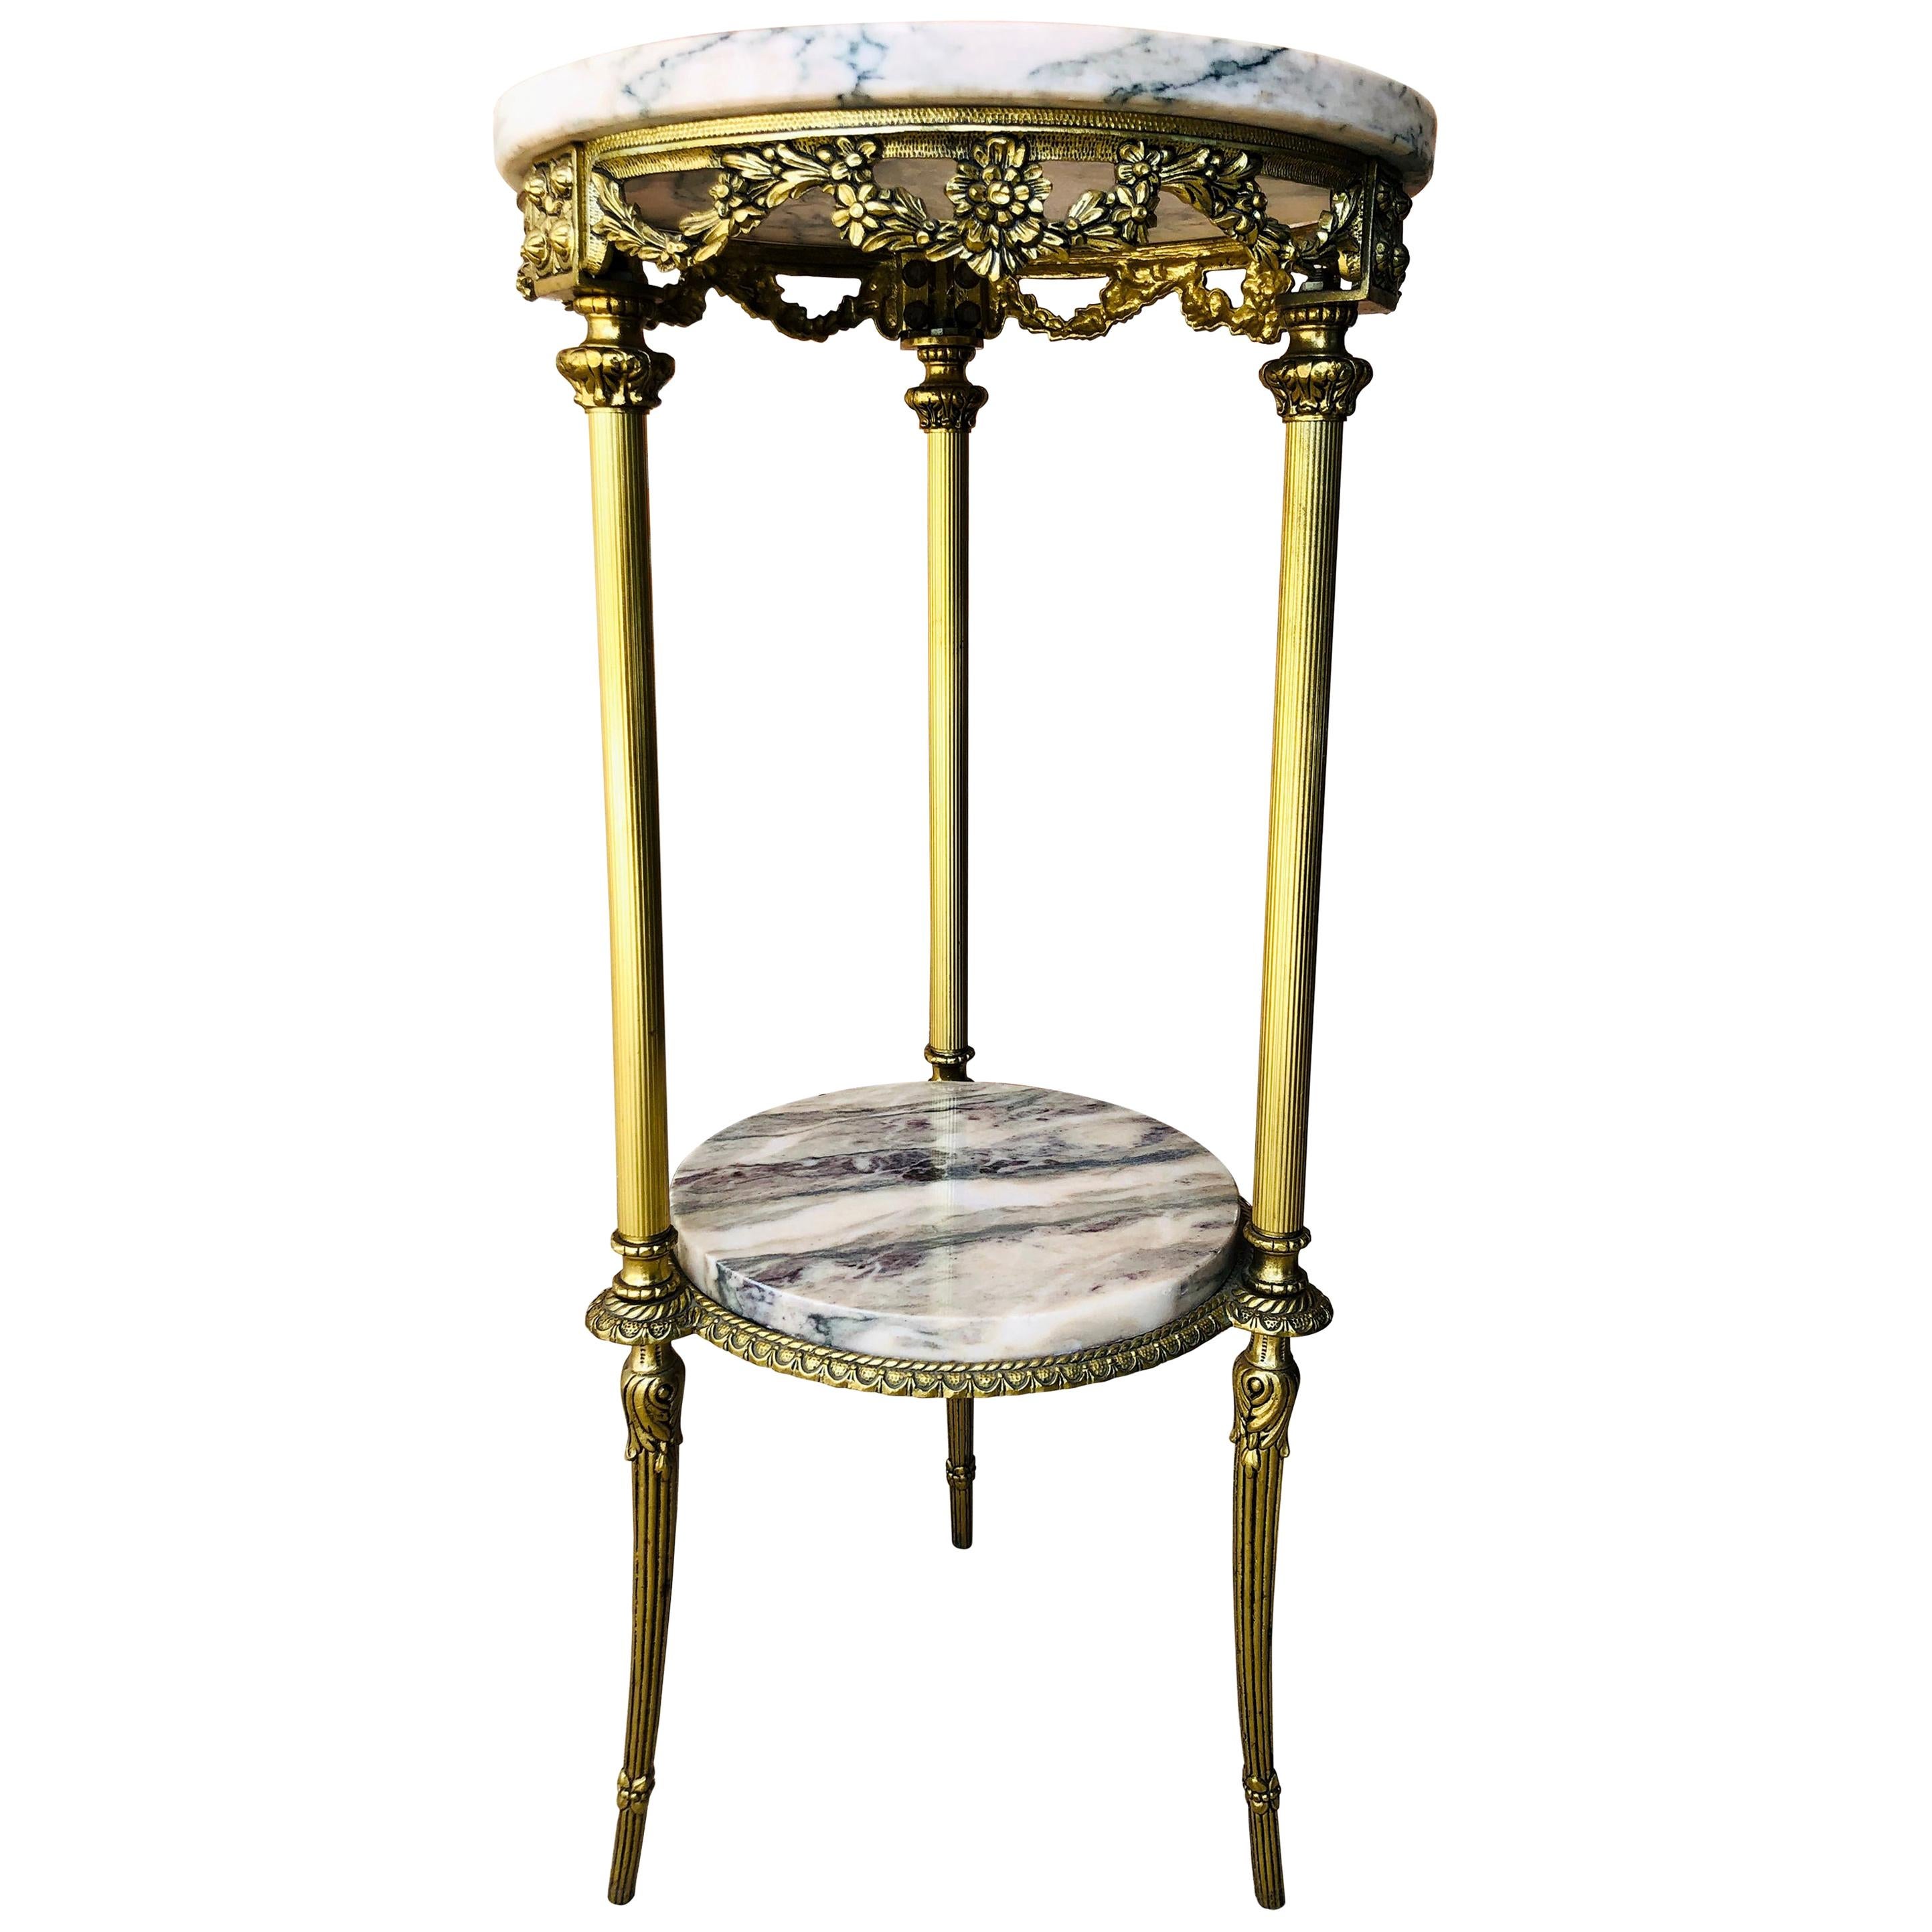 19th Century Spanish Bronze and Brass Gilded Side Table with White Marbles Top